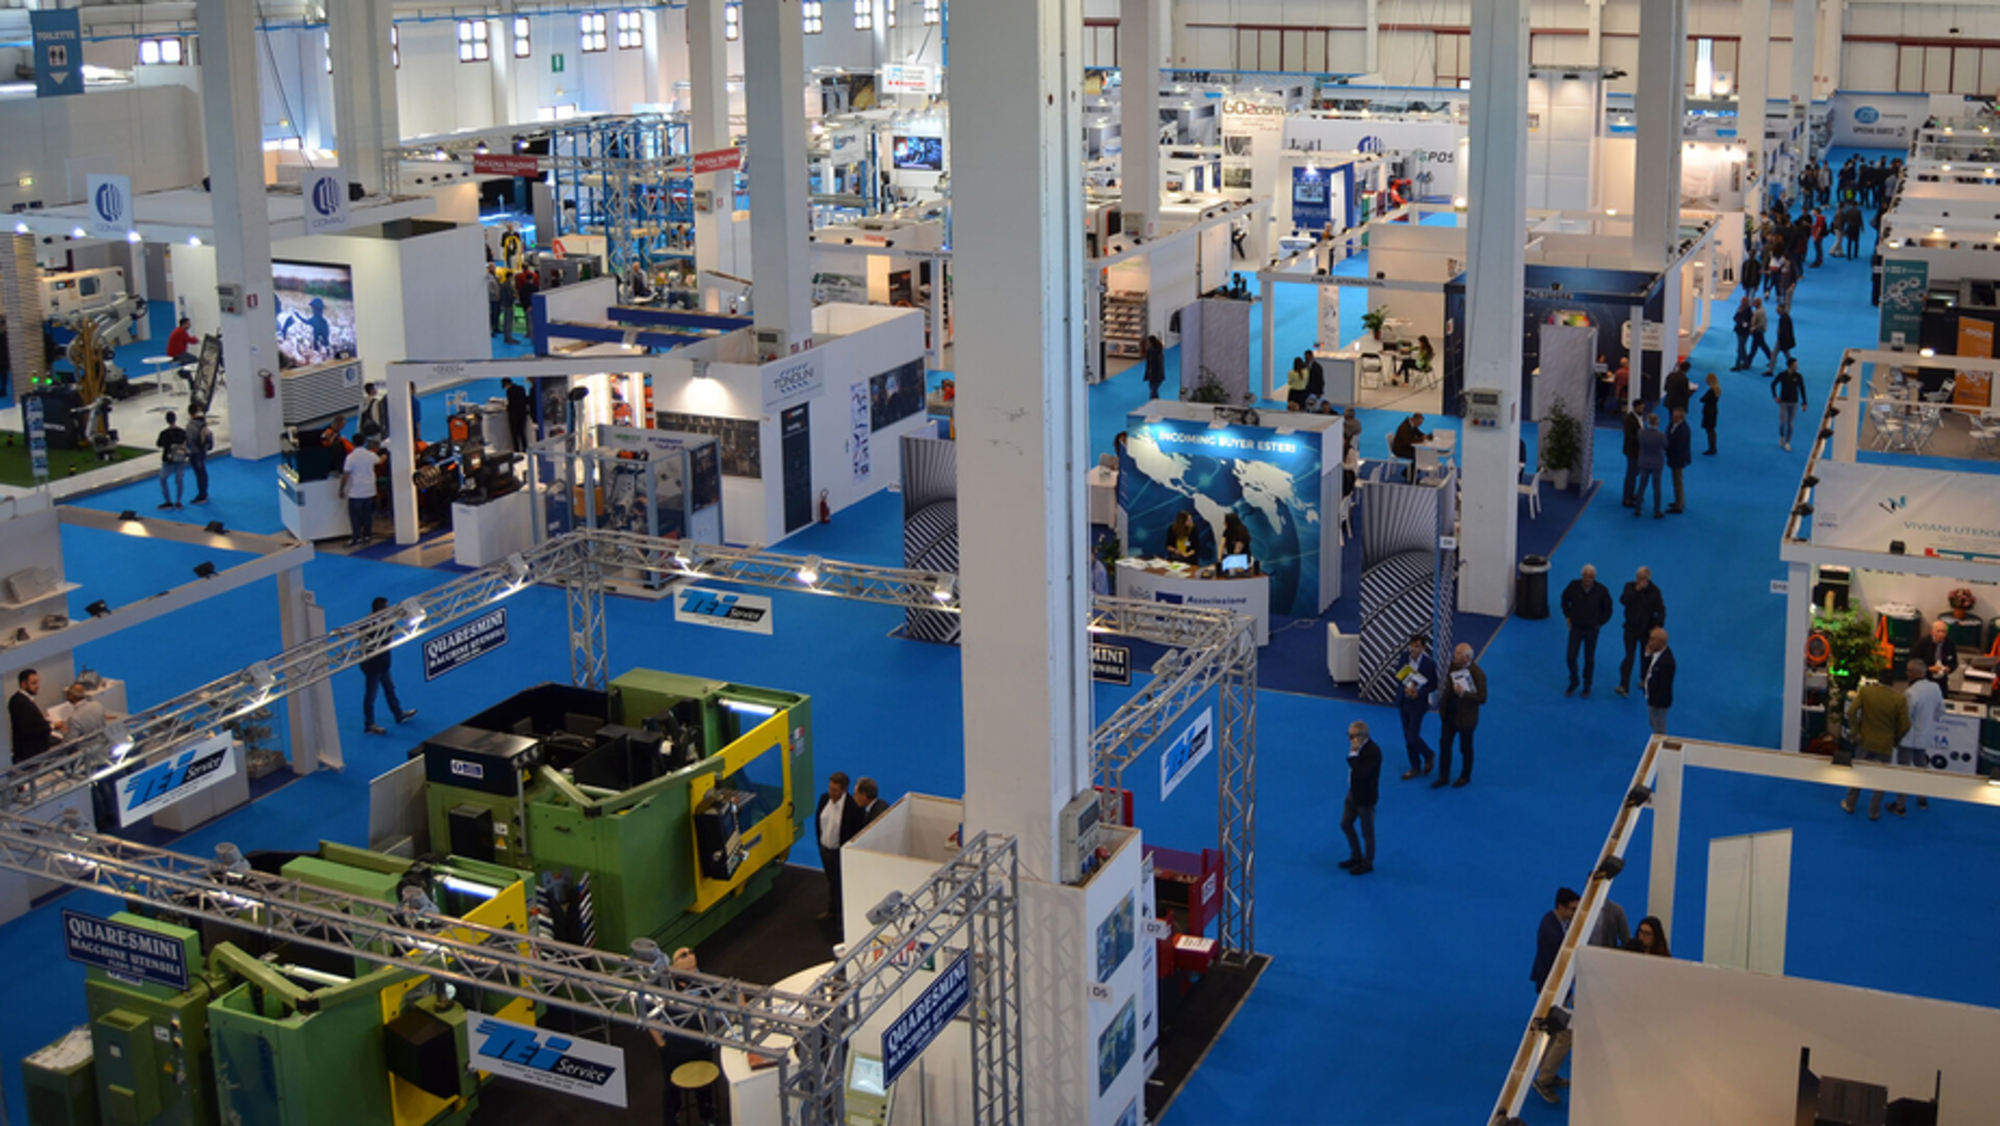 THE IMPORTANCE OF TRADE FAIRS - Our experience